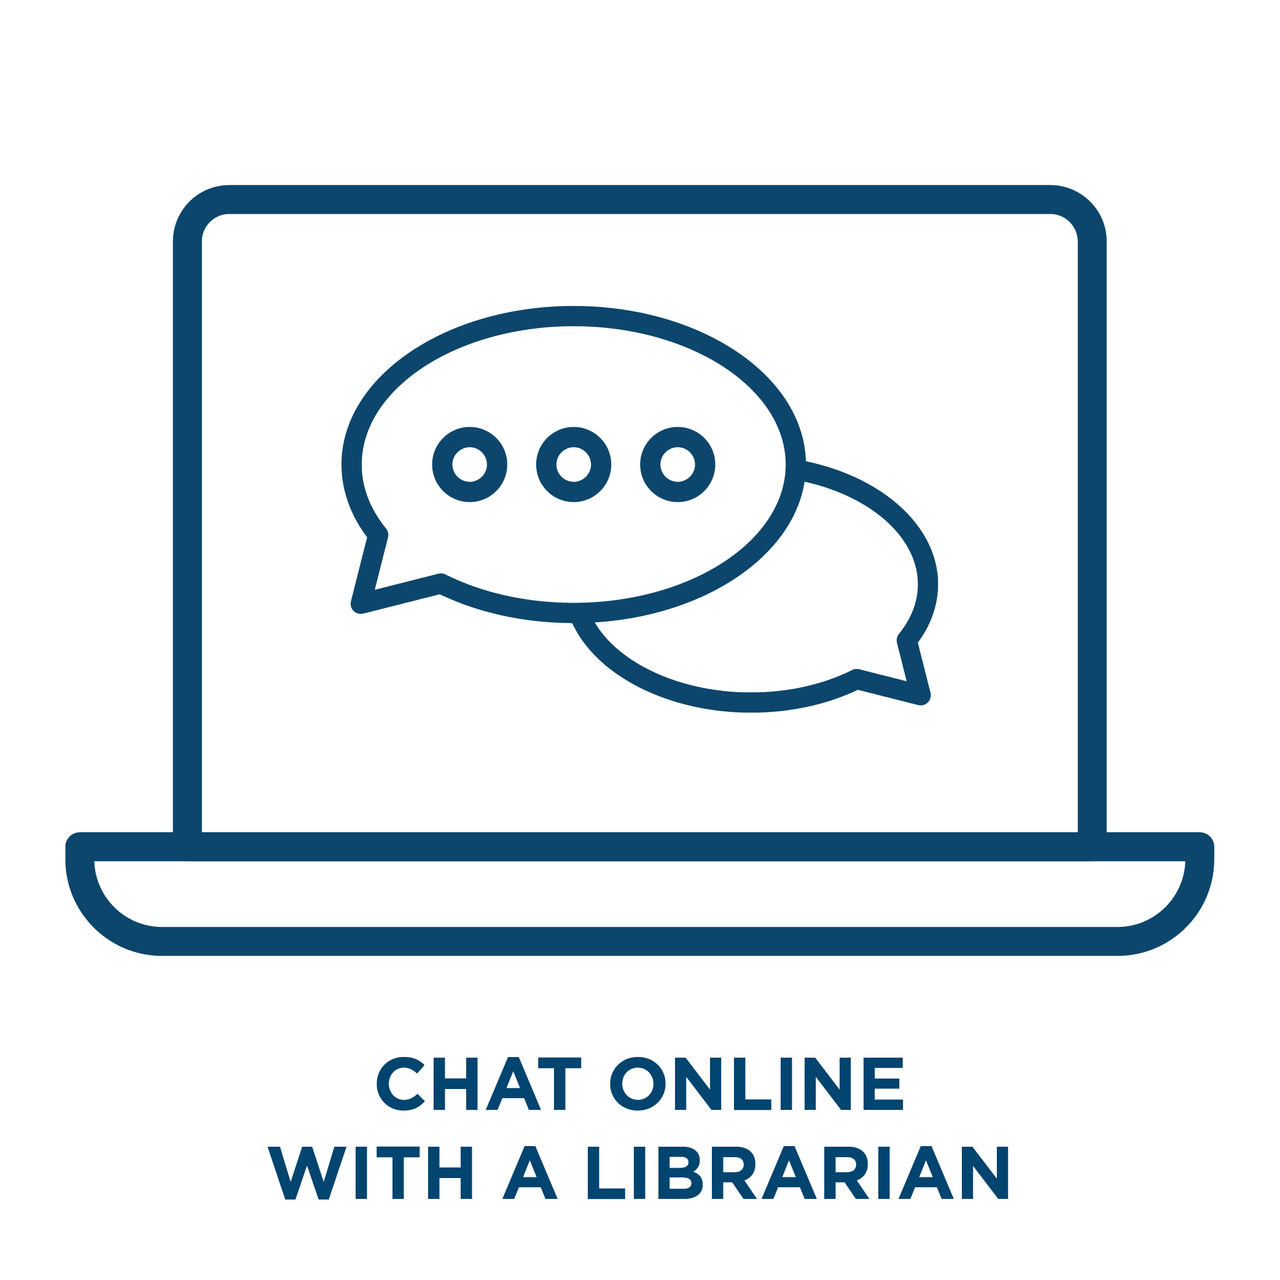 Chat online with a librarian